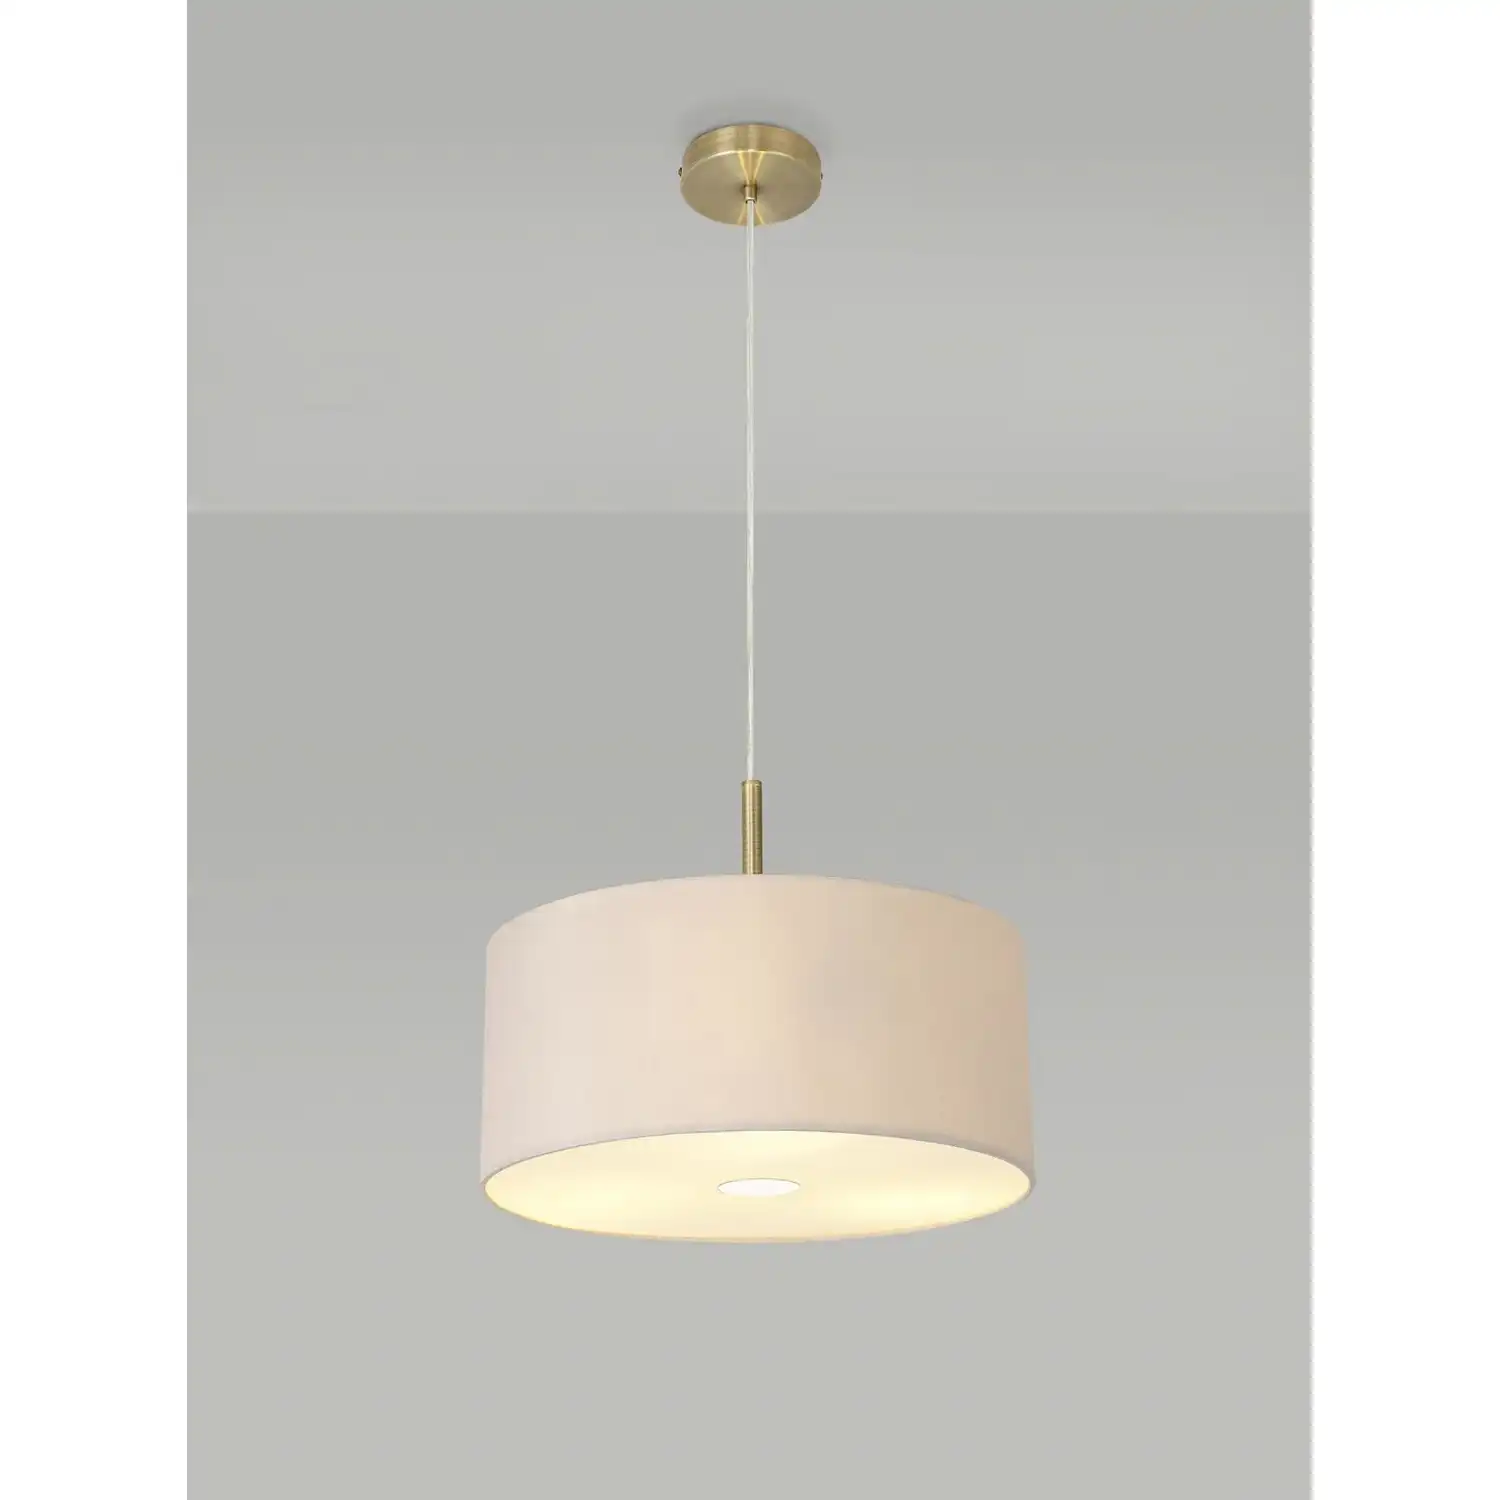 Baymont Antique Brass 3m 3 Light E27 Single Pendant c w 400 Dual Faux Silk Fabric Shade, Nude Beige Moonlight And 400mm Frosted AB Acrylic Diffuser